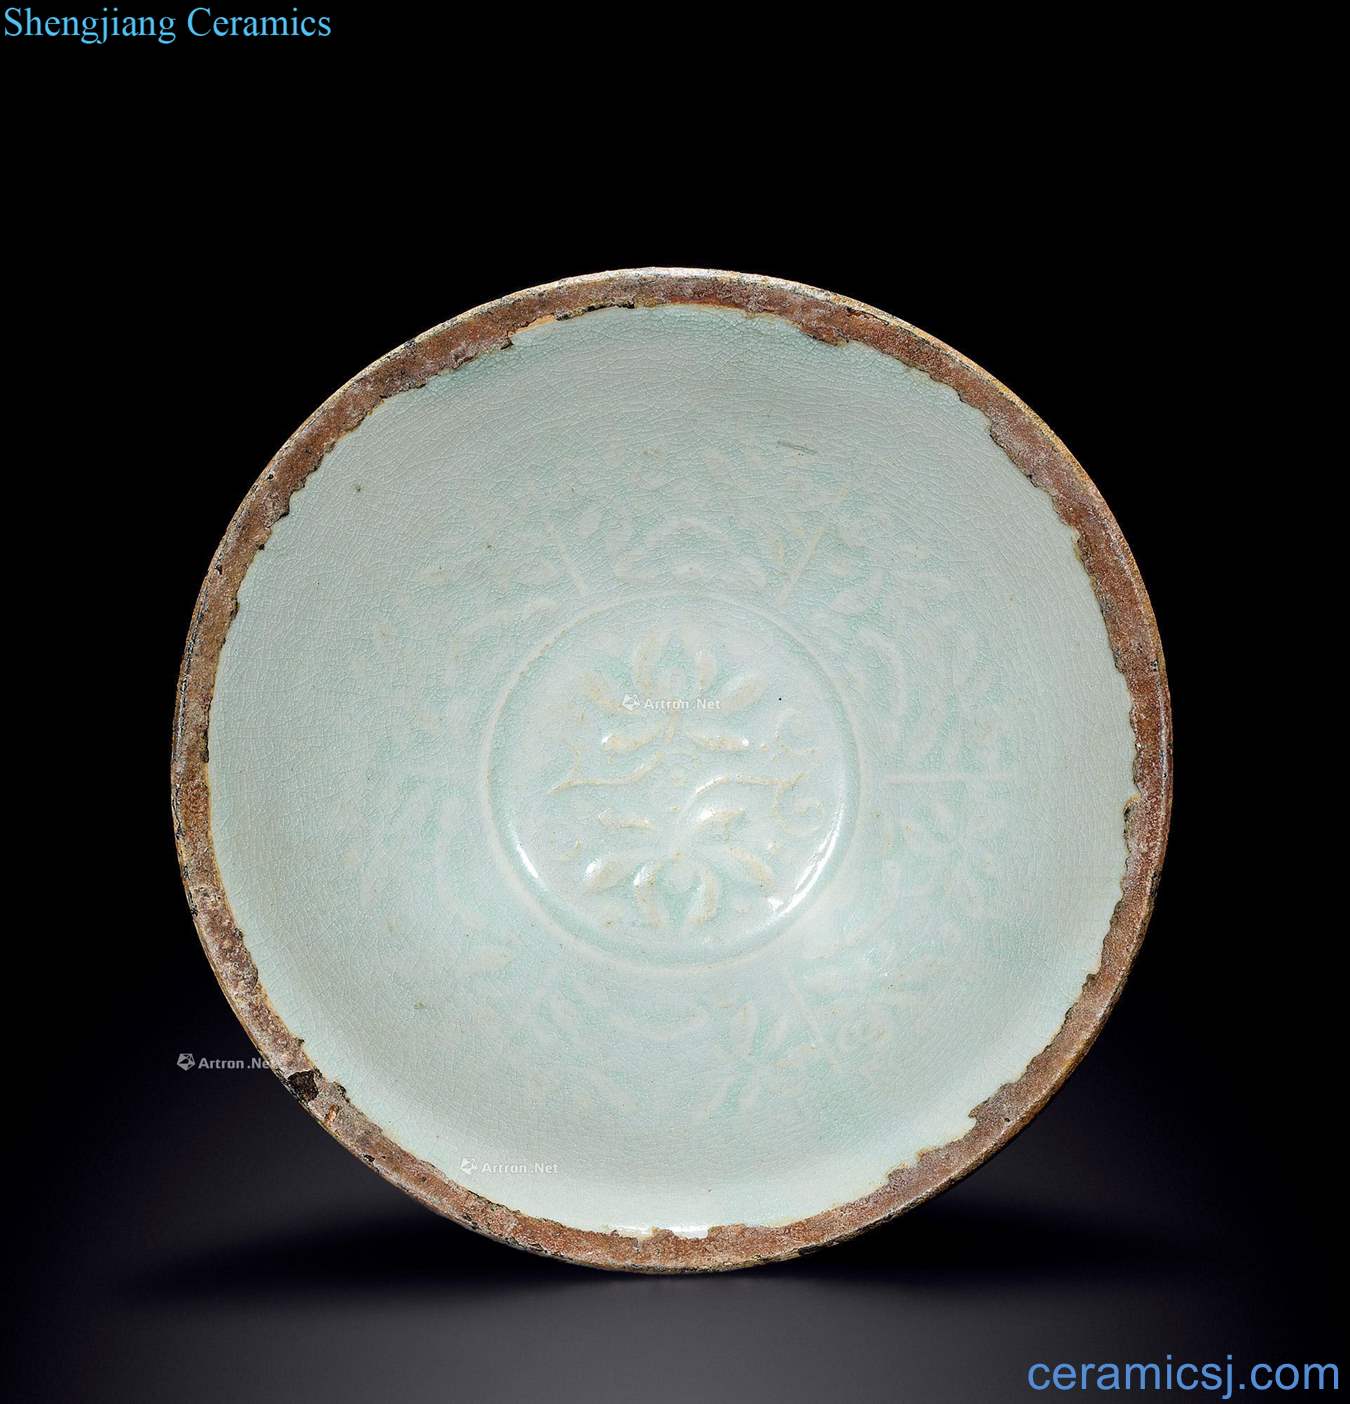 The southern song dynasty printed shadow blue bowl